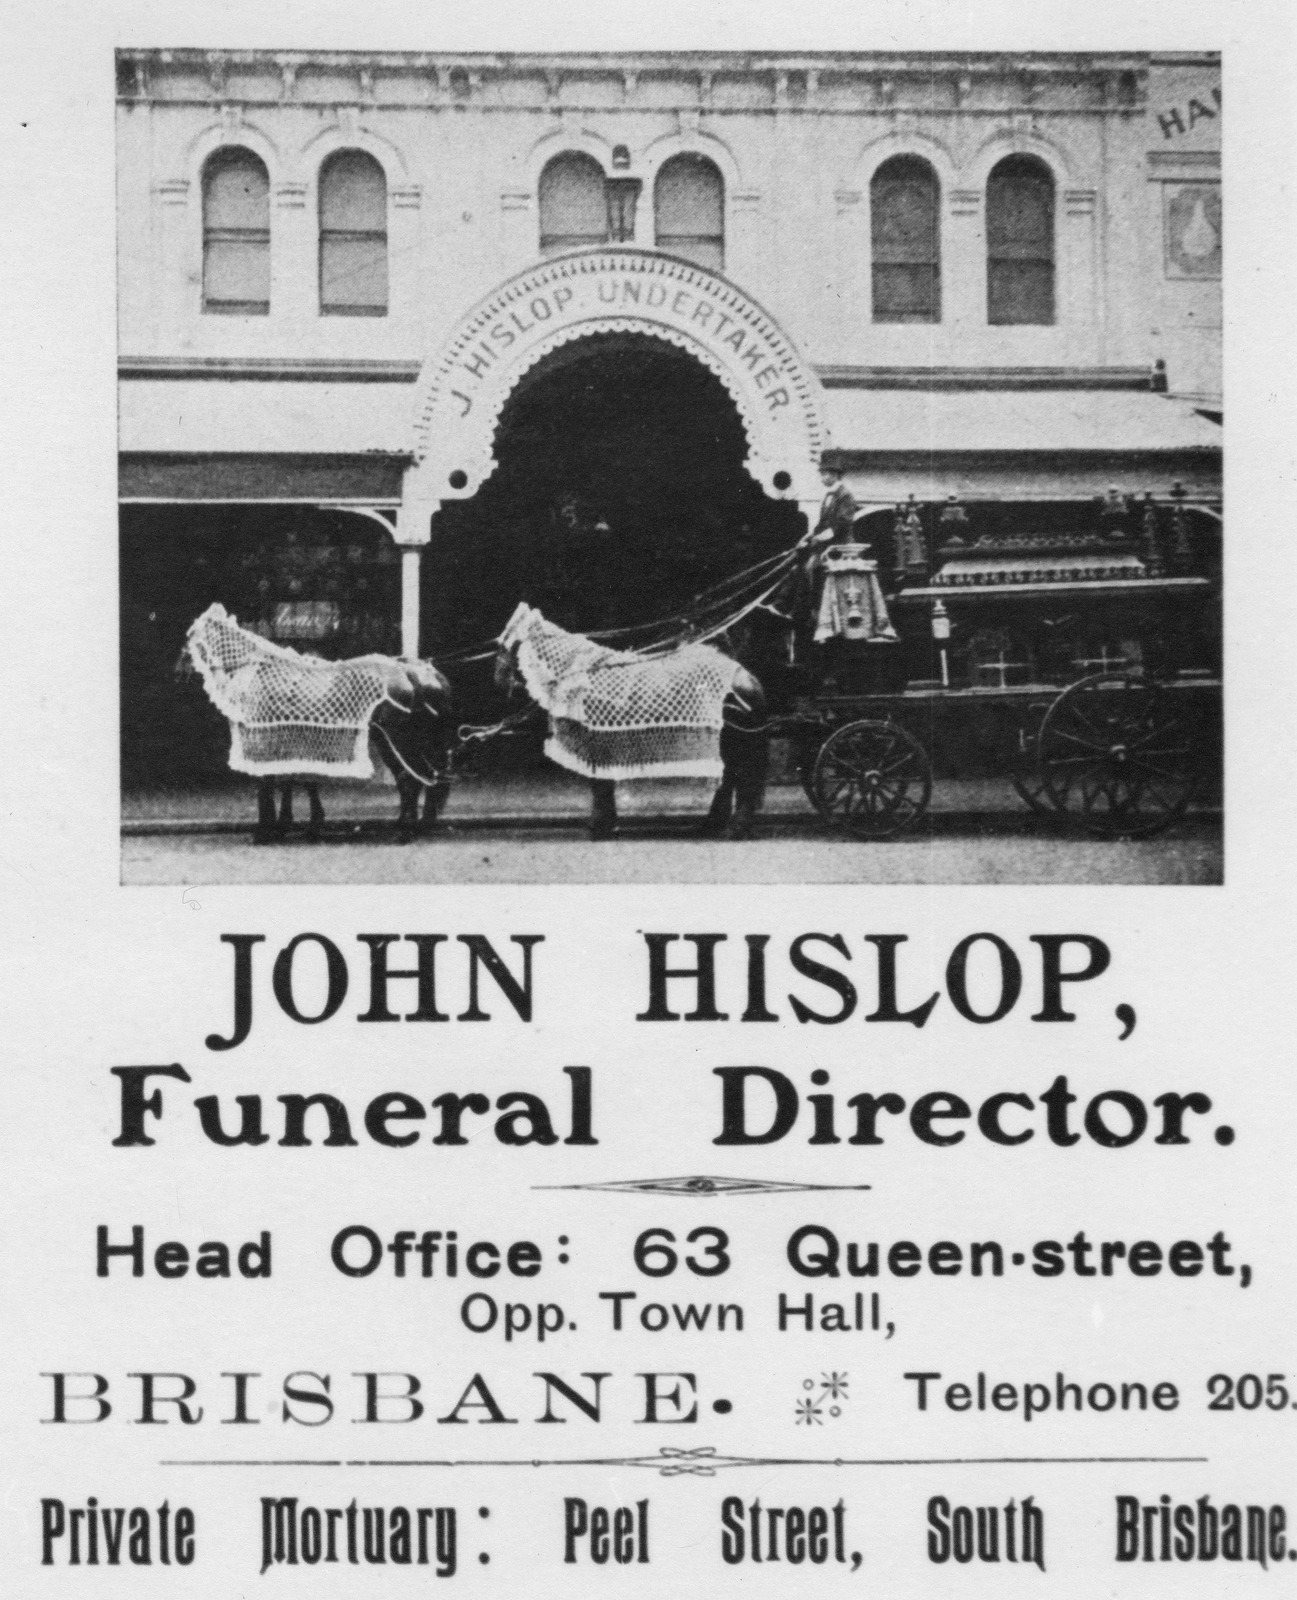 Advertisement for John Hislop's undertaking business featuring the premises and a horsedrawn hearse, 1902